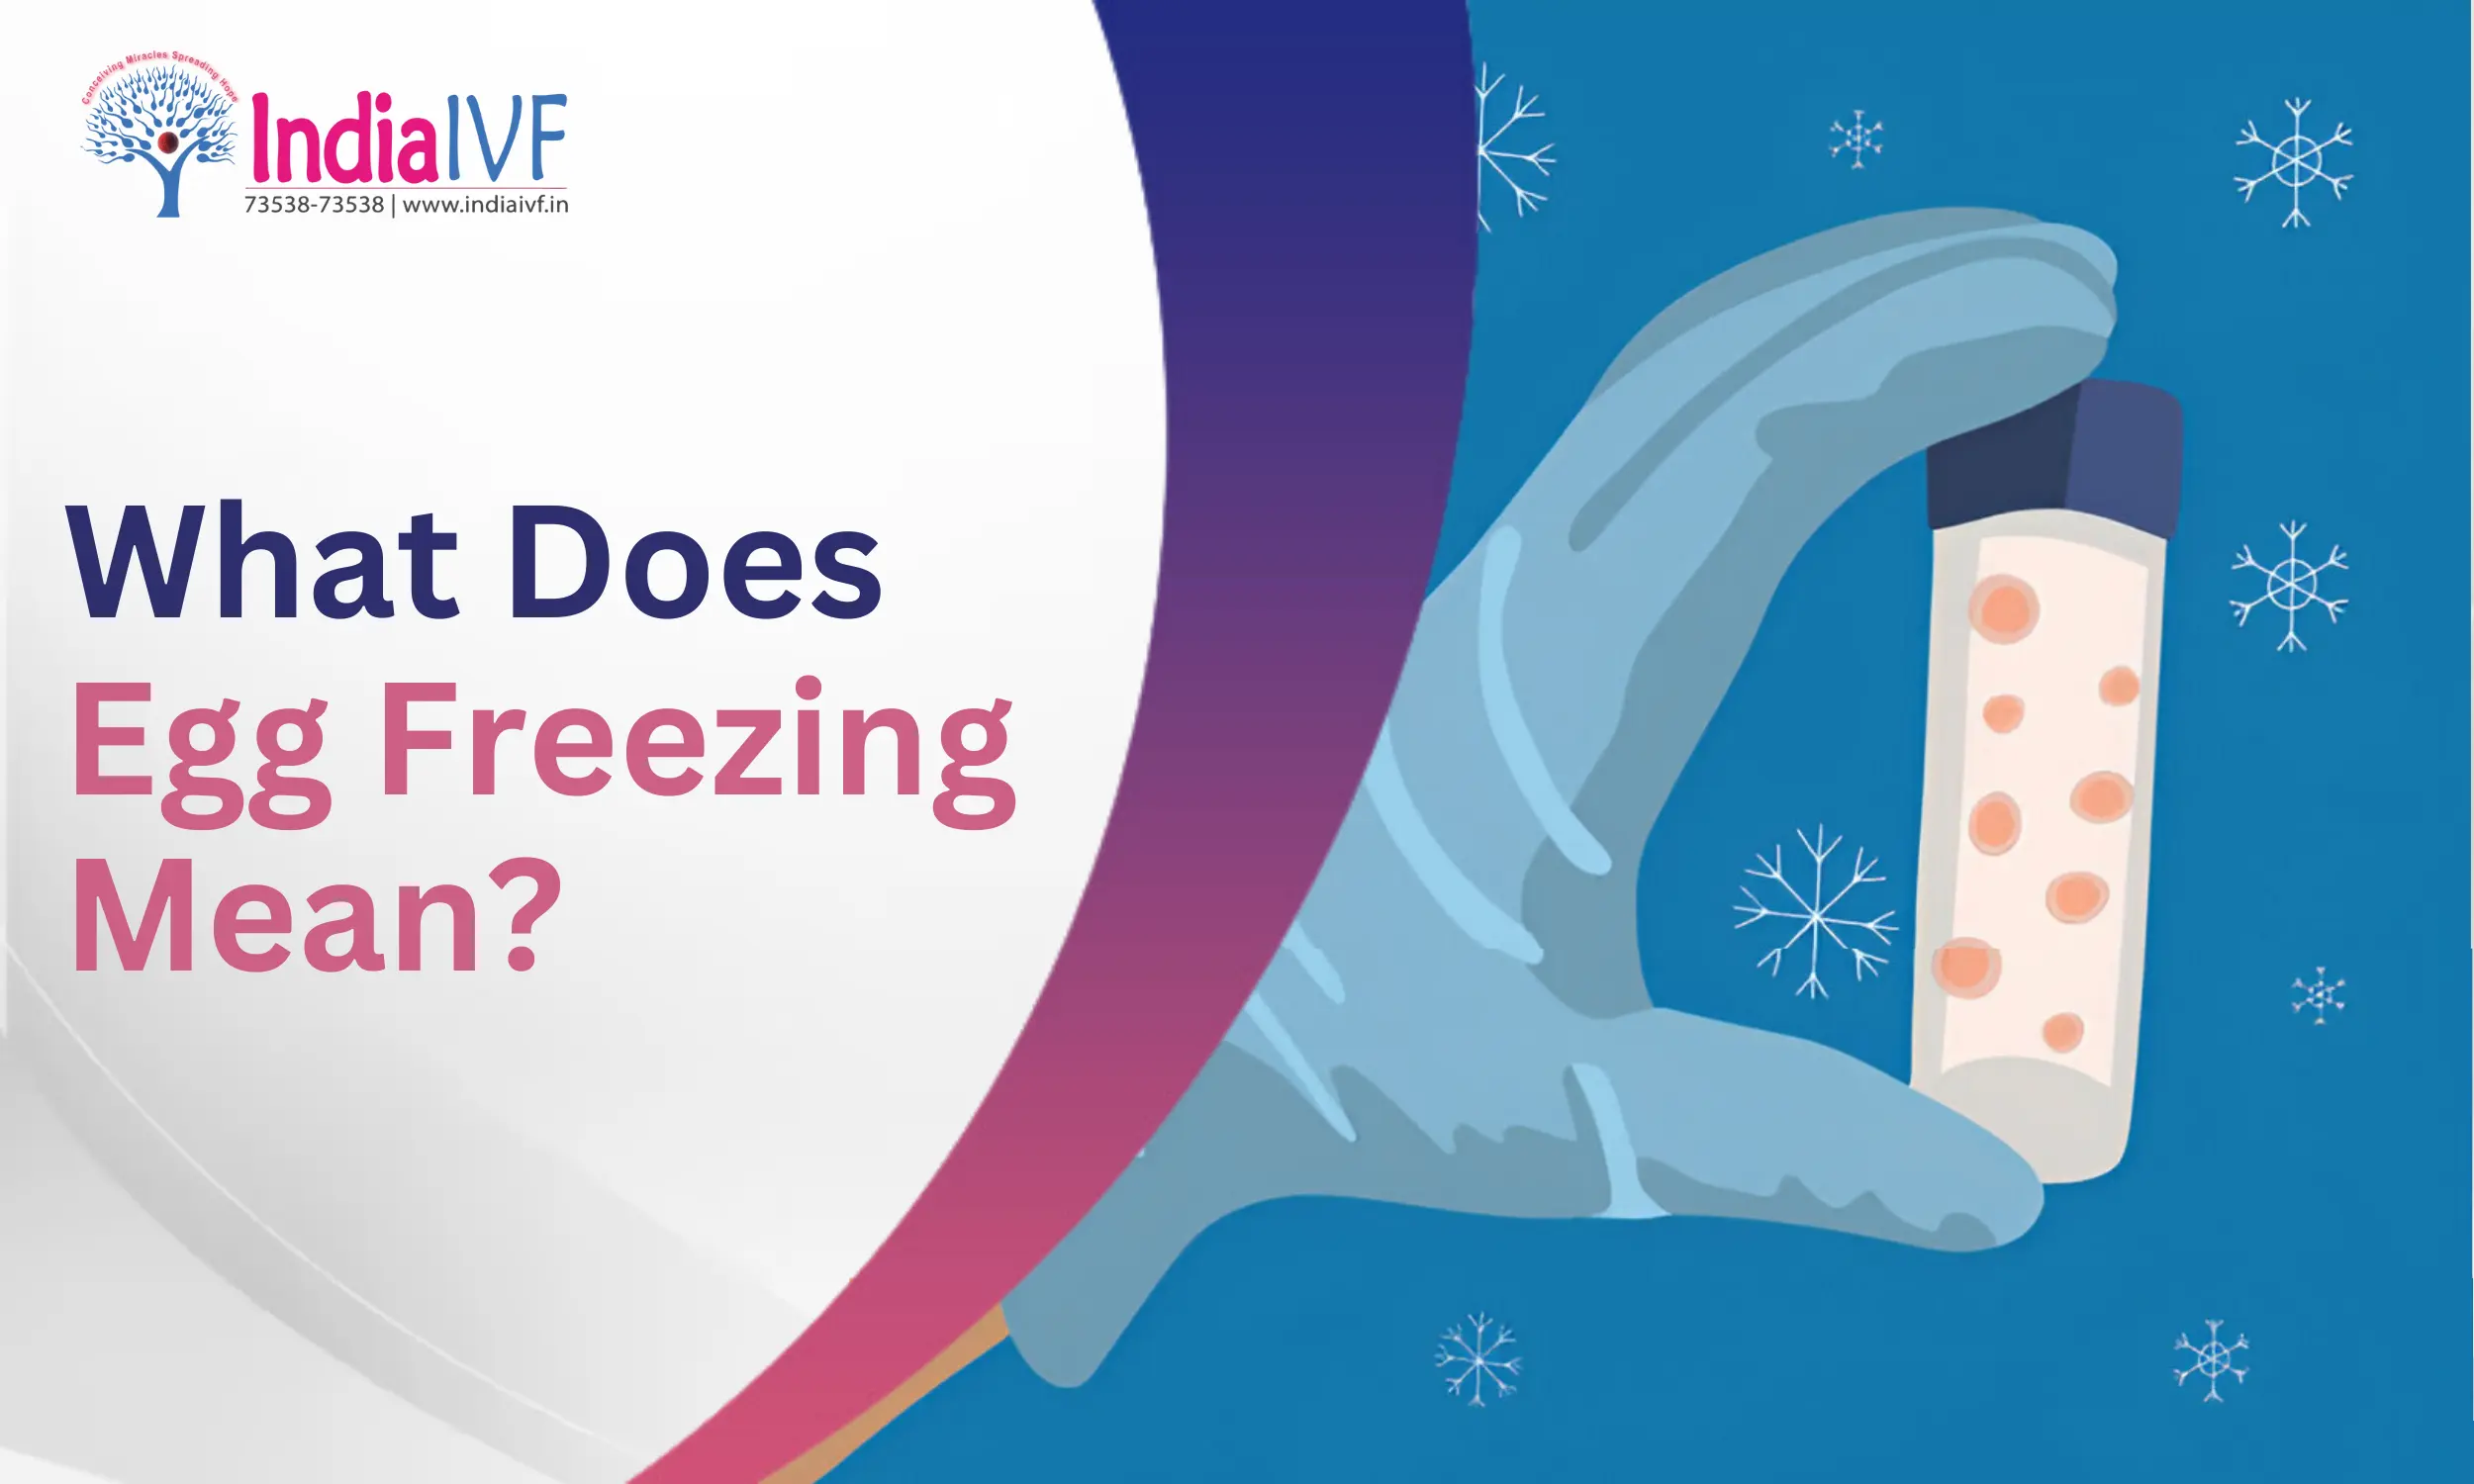 What Does Egg Freezing Mean